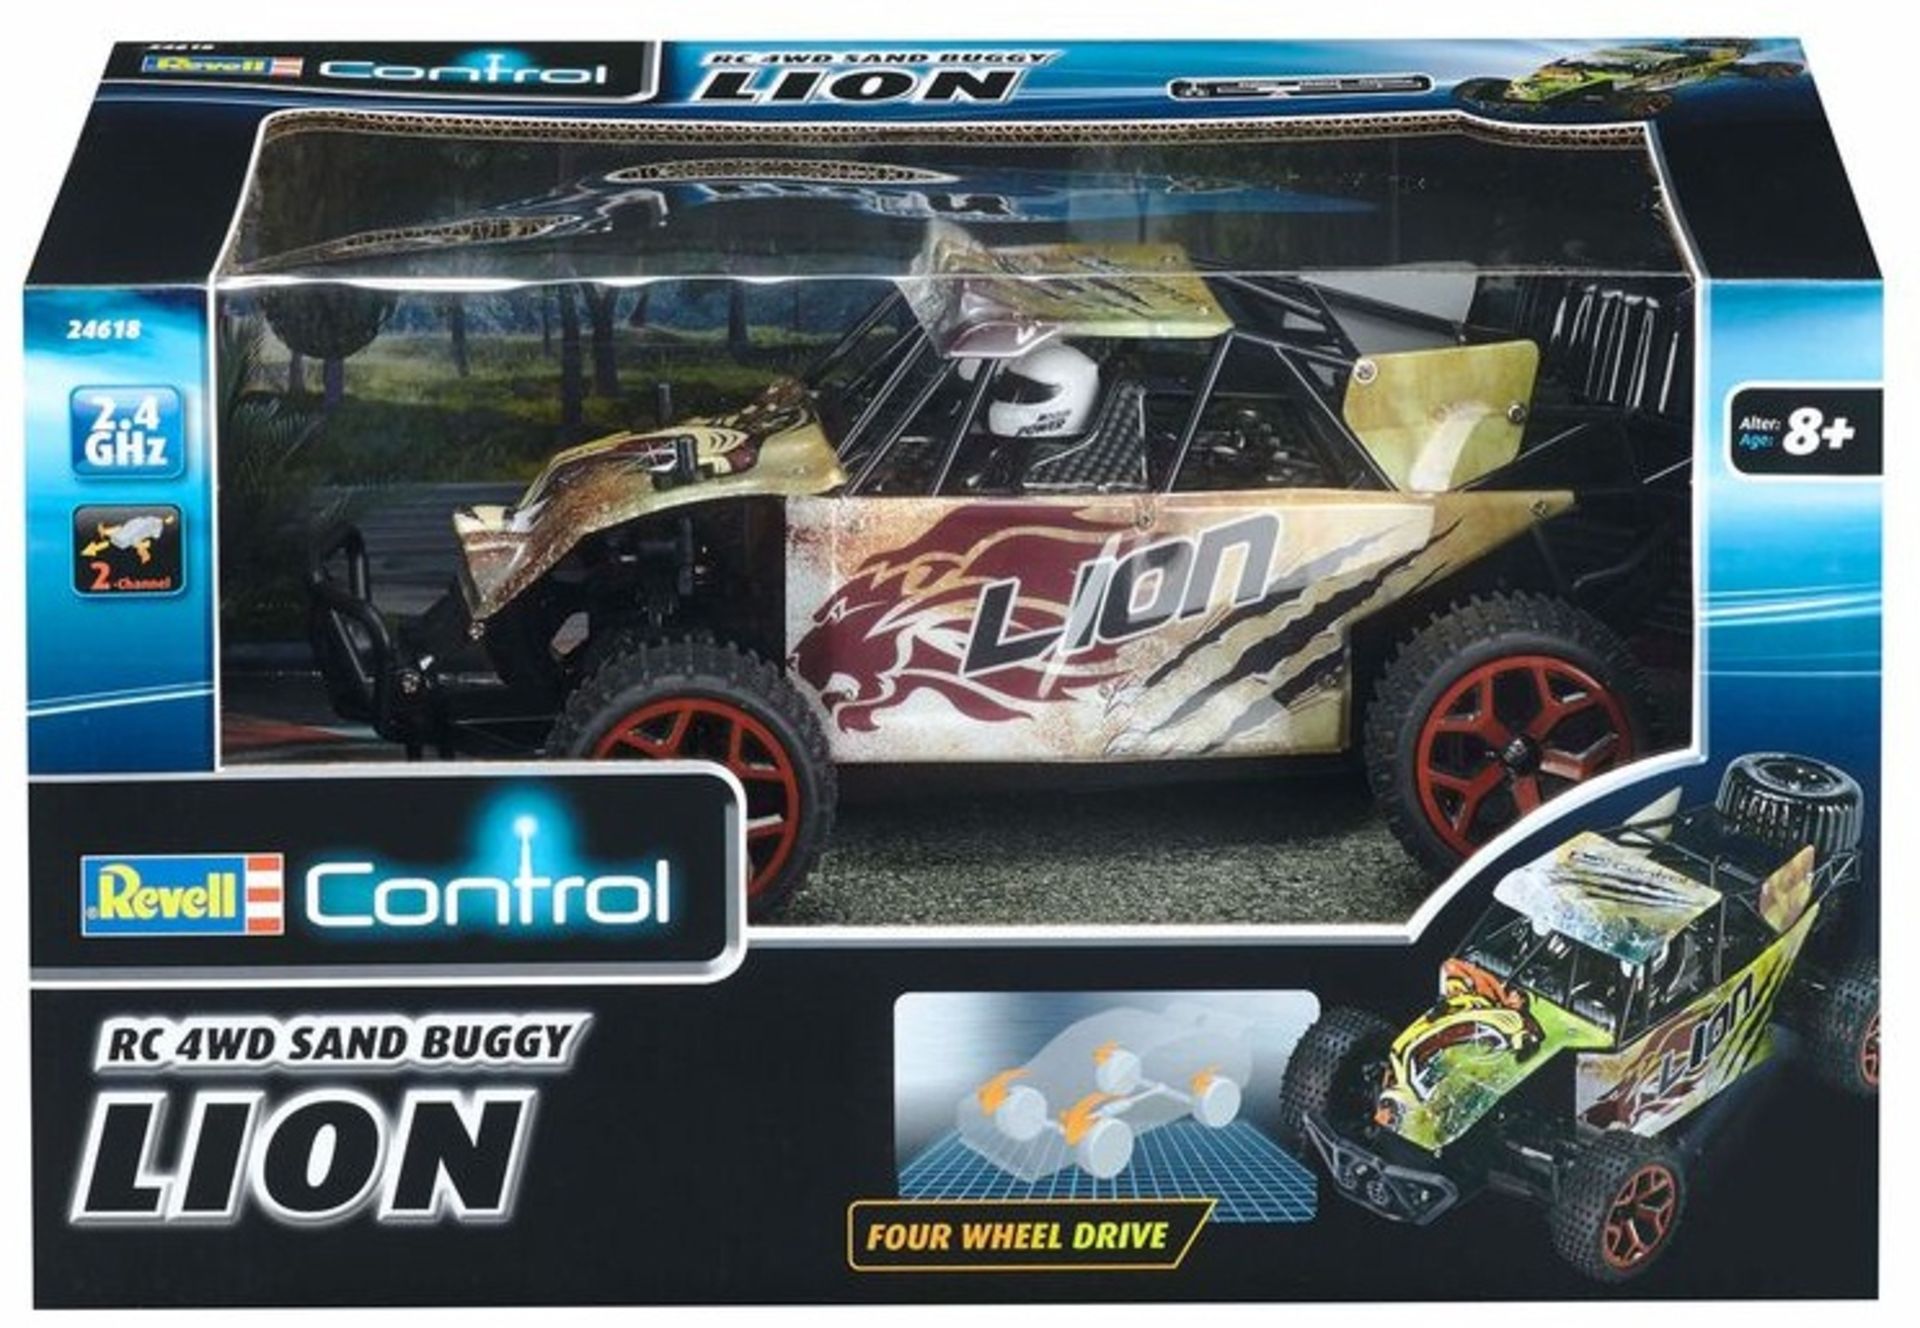 V Brand New Revell R/C 4 Wheel Drive Sand Buggu Lion Up To 15 kph 2.4GHz 2 Channel Remote Control - Image 2 of 2